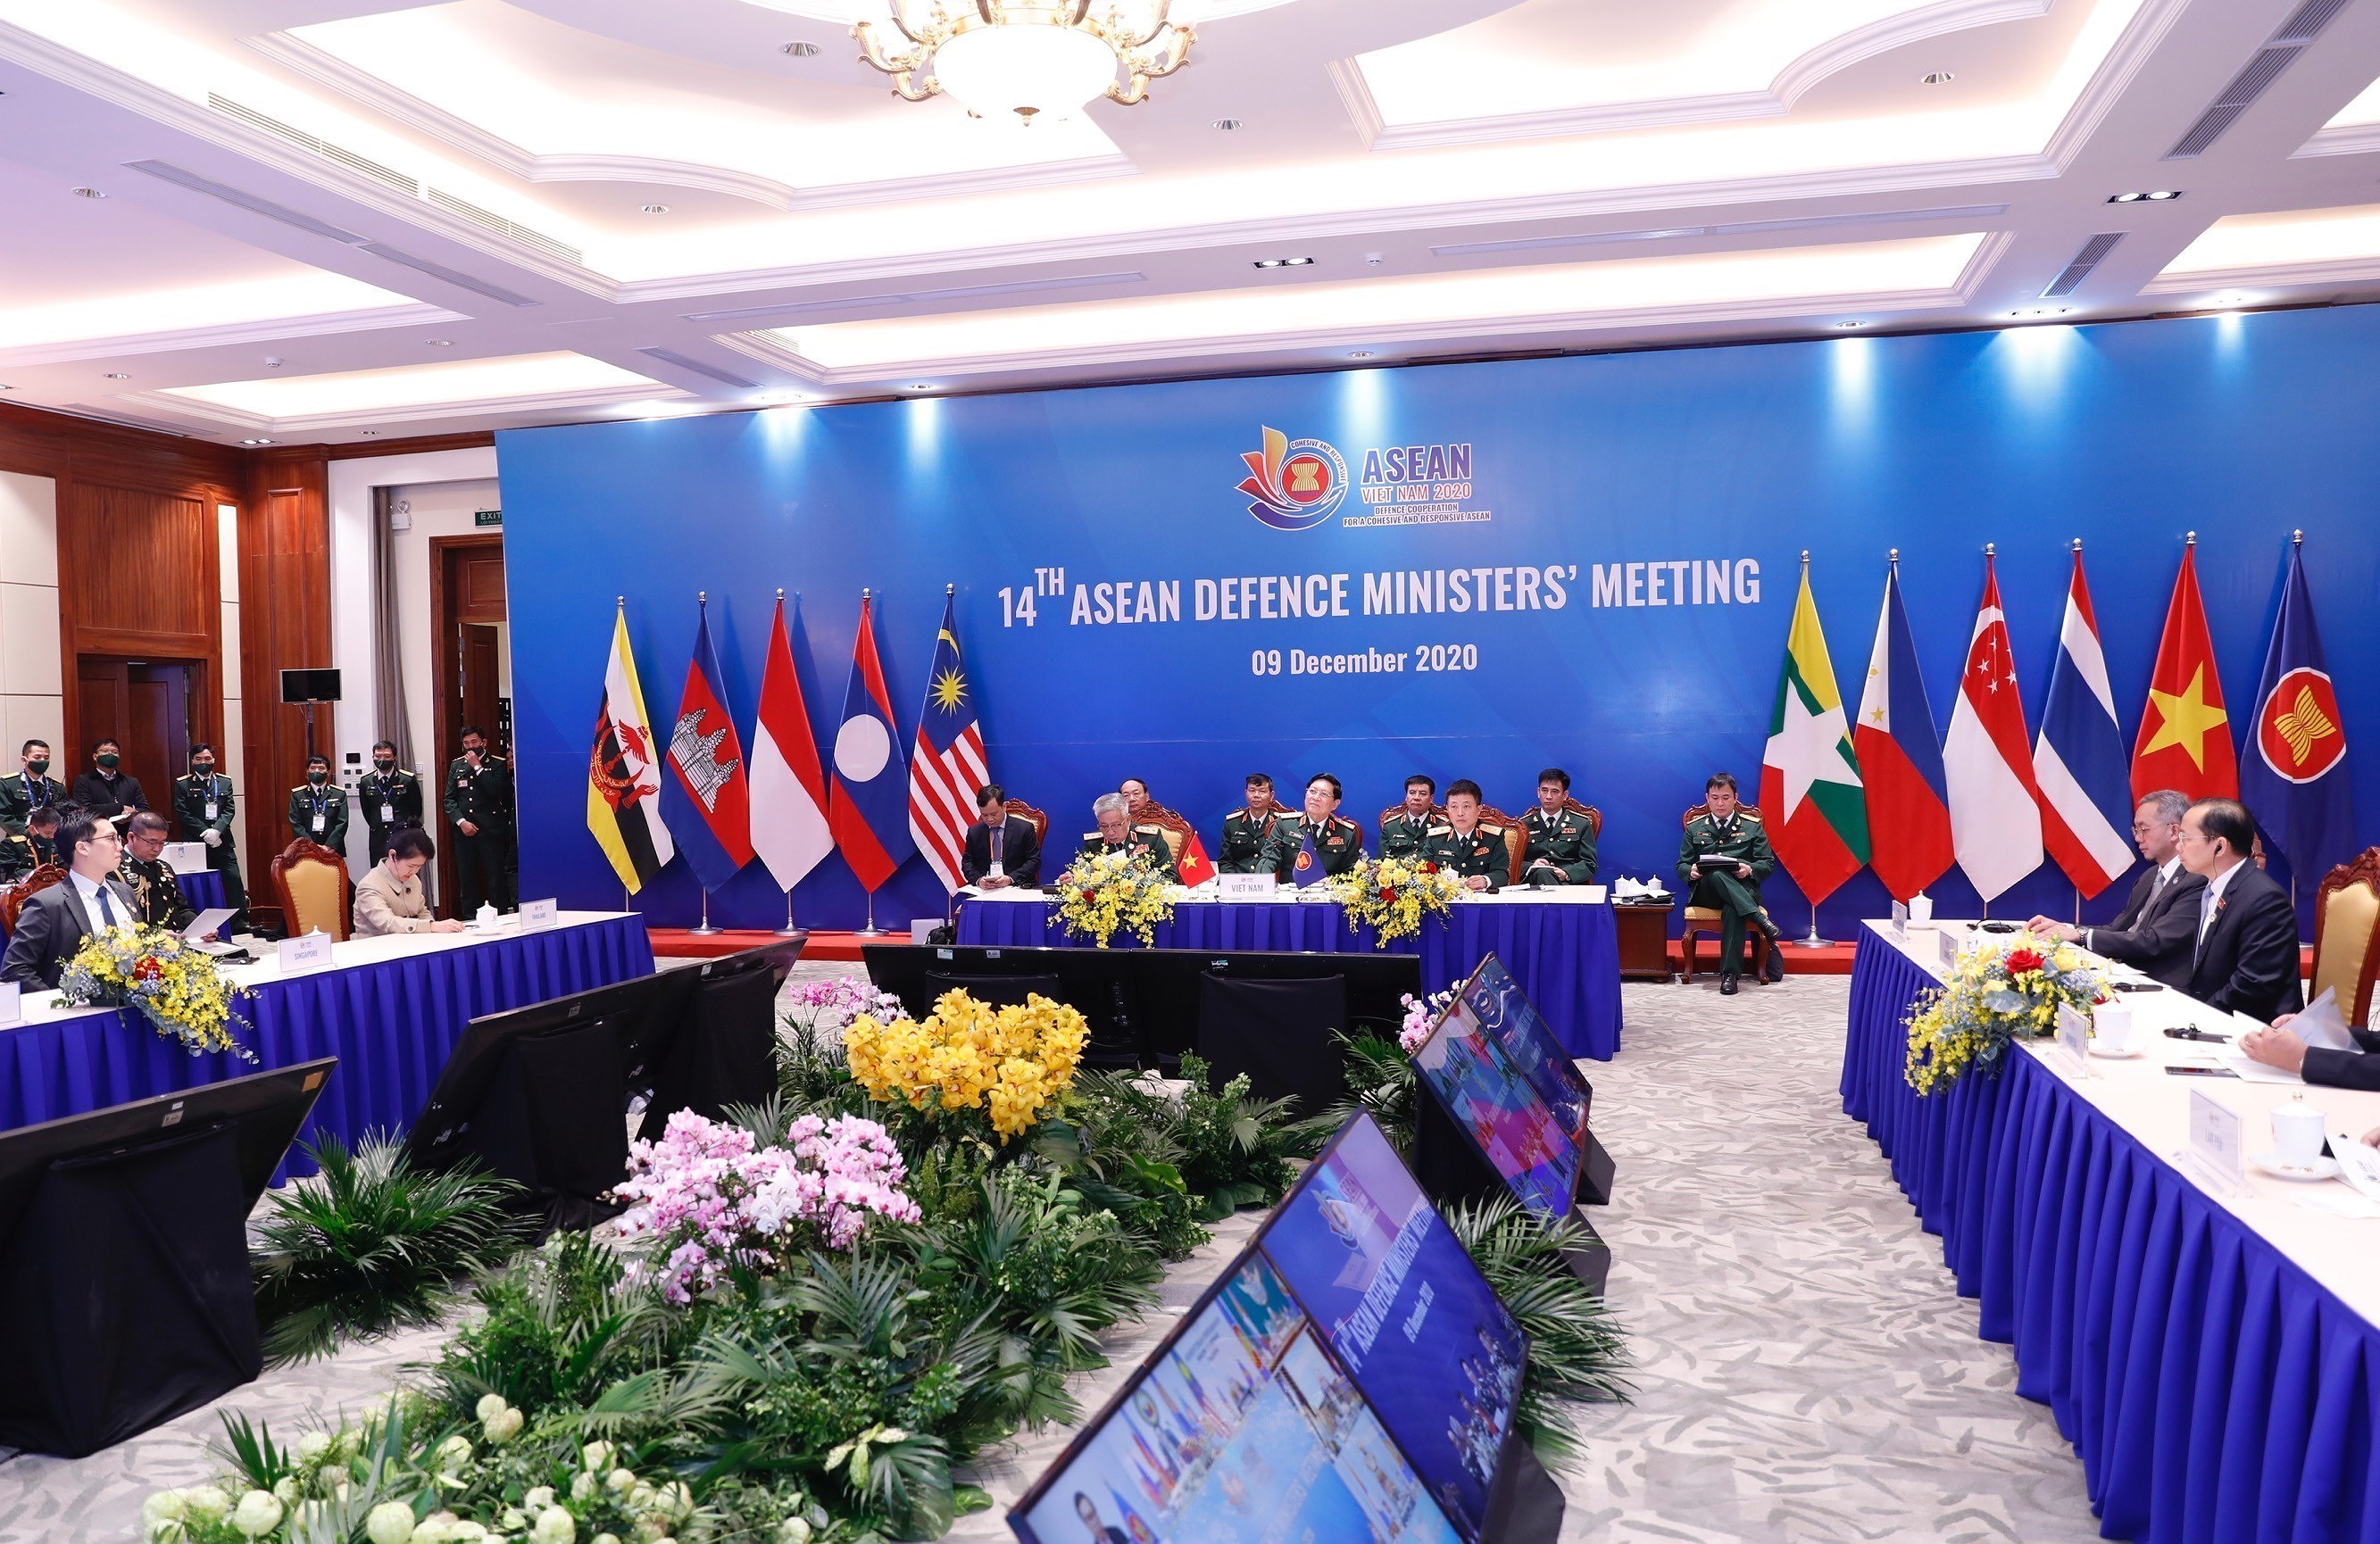 ASEAN 2020: 14th ASEAN Defence Ministers' Meeting hinh anh 7